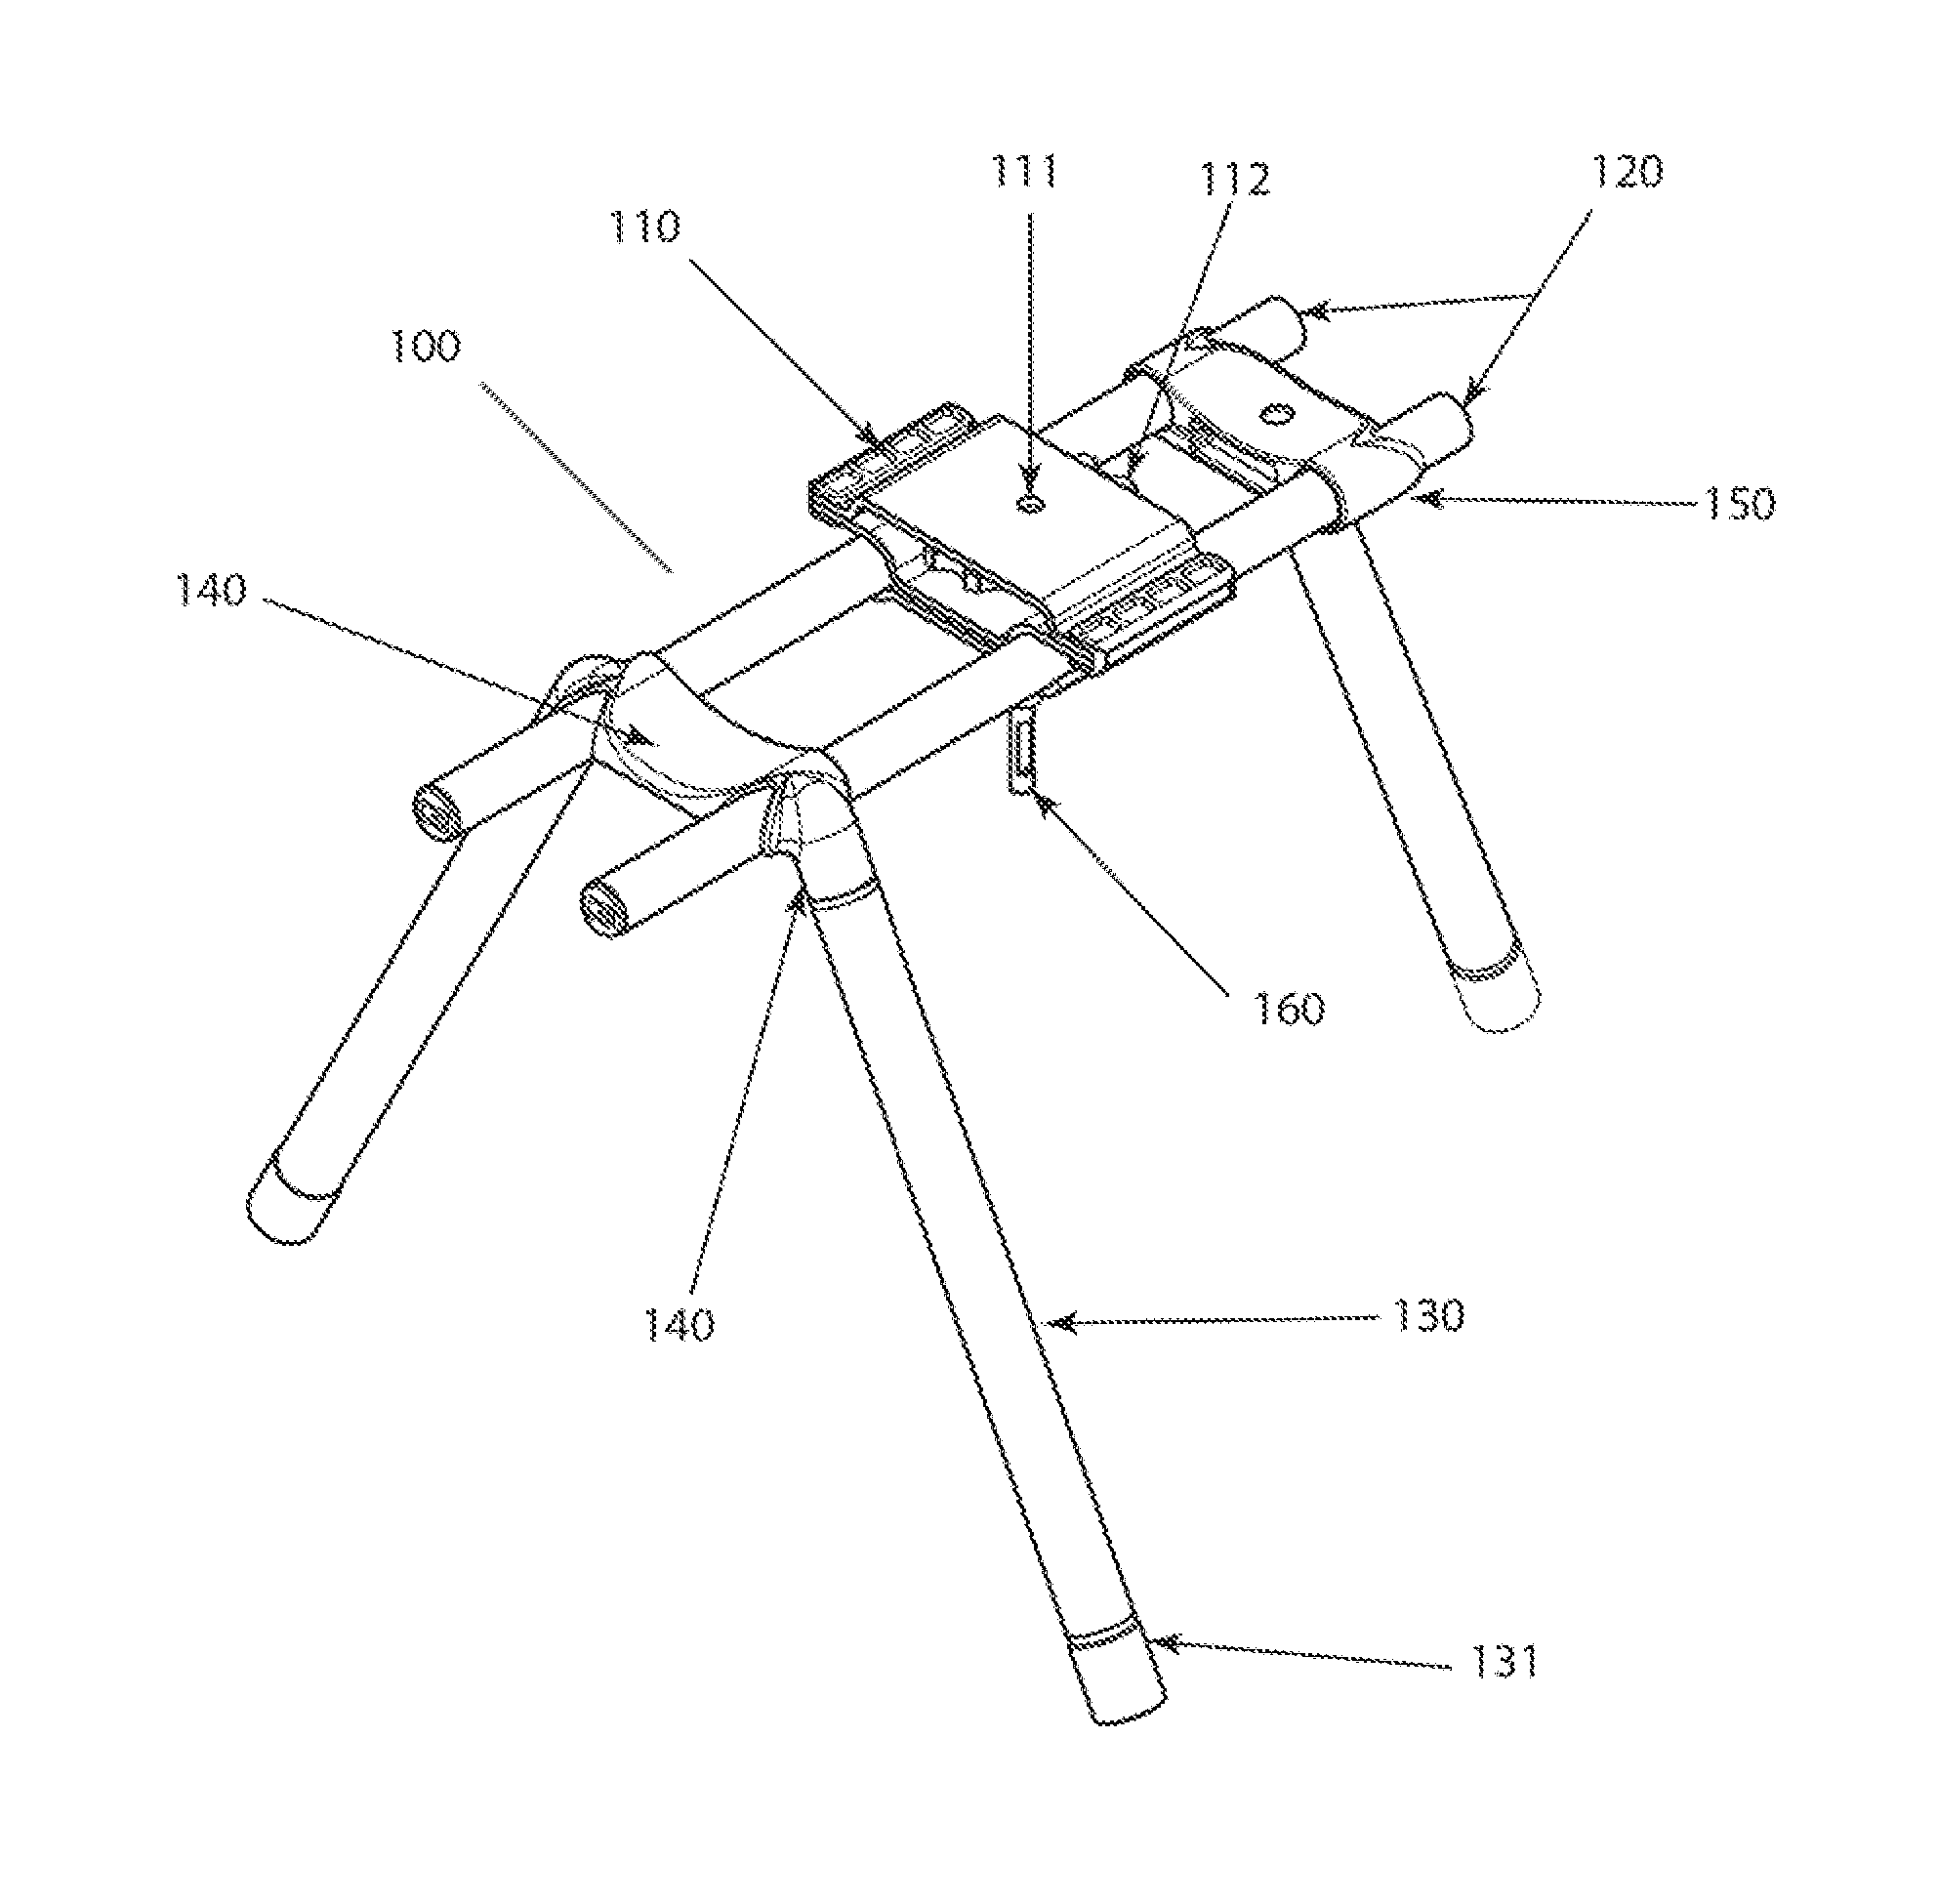 Camera stabilization device and method of use